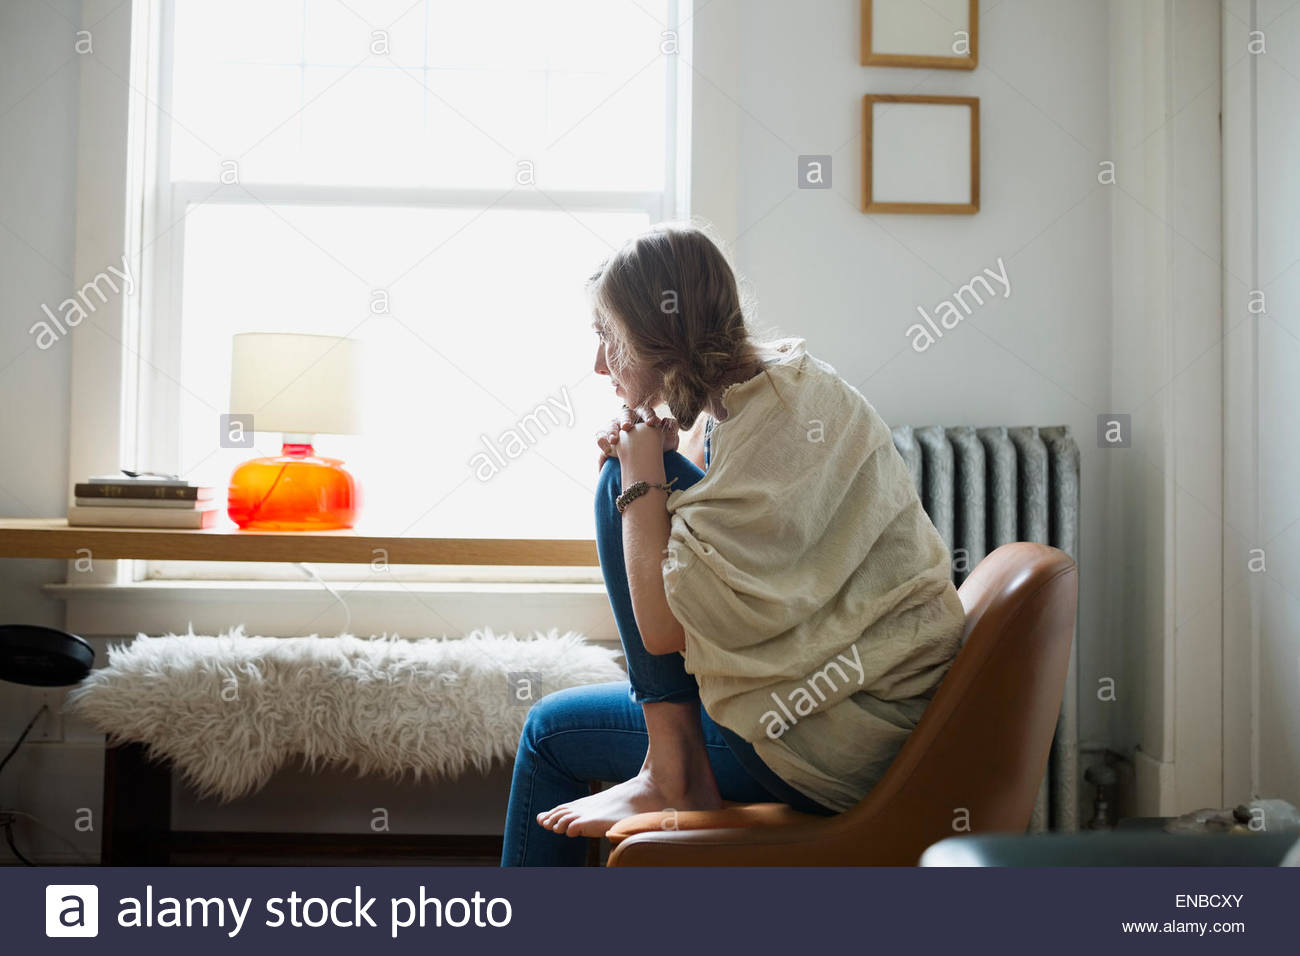 Pensive woman looking out living room window Stock Photo